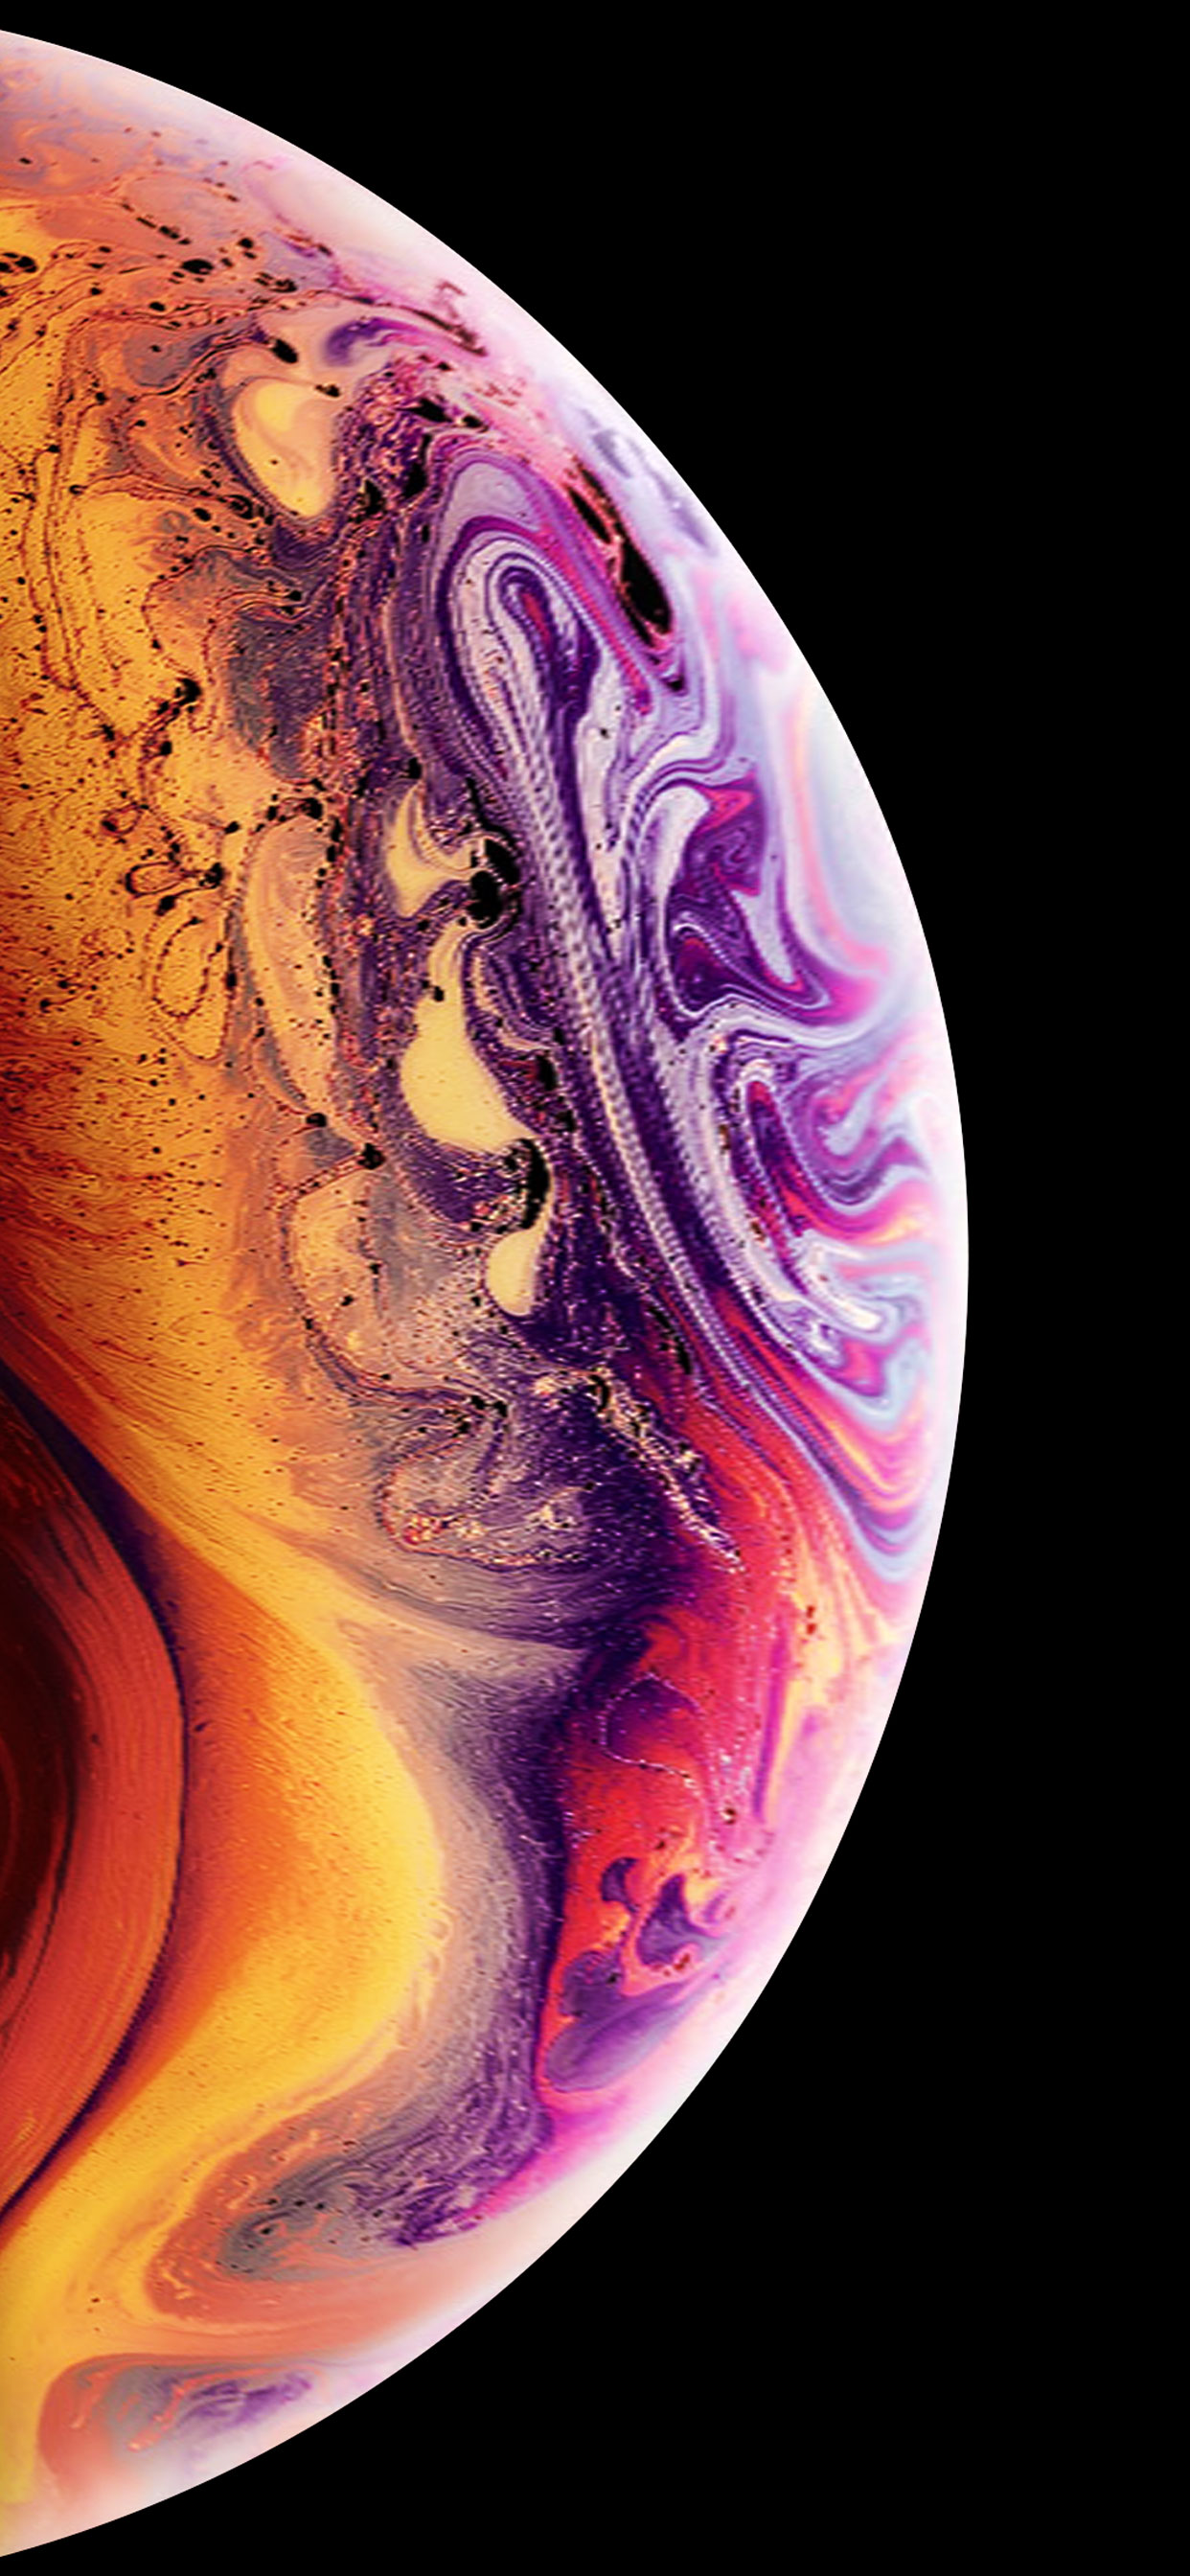 30 Cool High Quality iPhone XS Max Wallpapers  Backgrounds